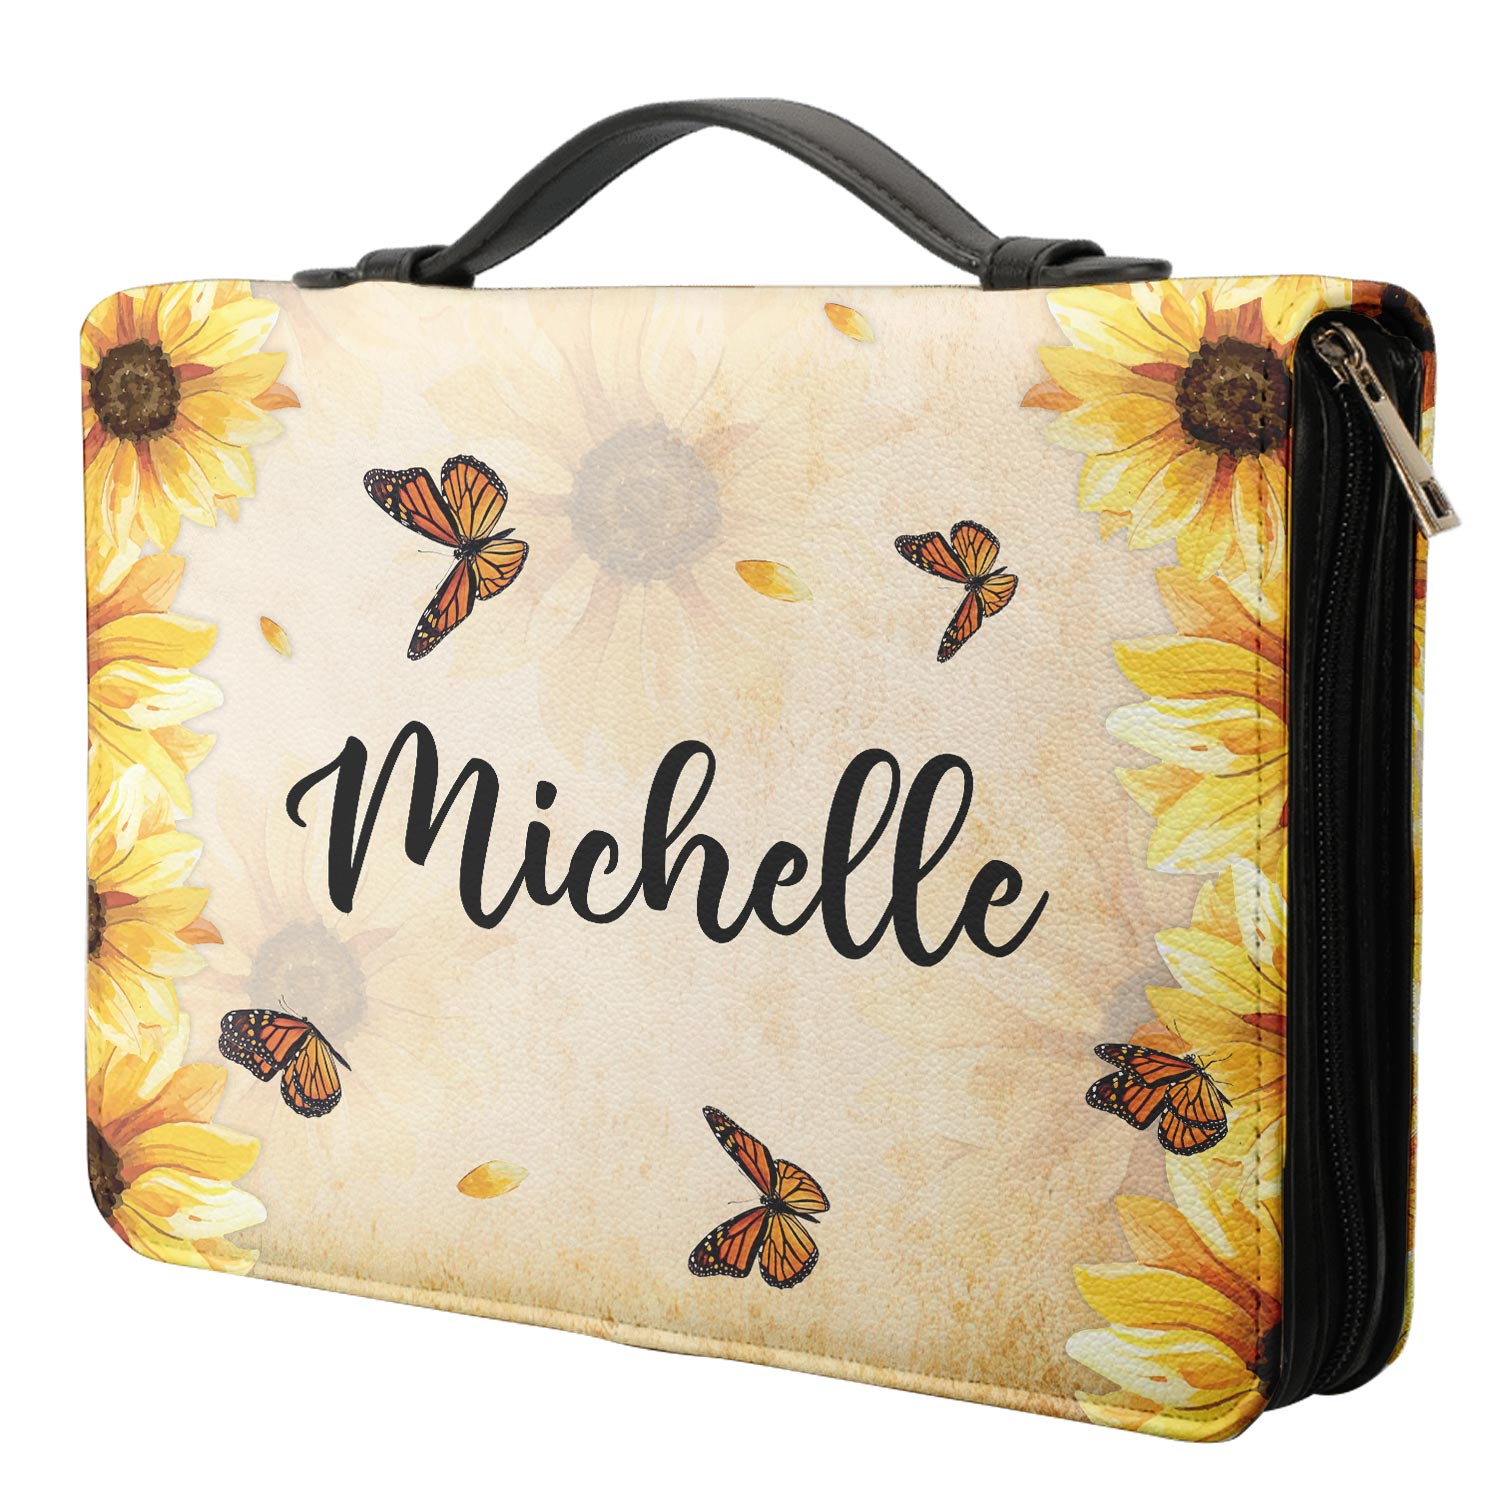  Personalized Bible Cover - Bible Emergency Number Butterfly Sunflower Bible Cover for Christians